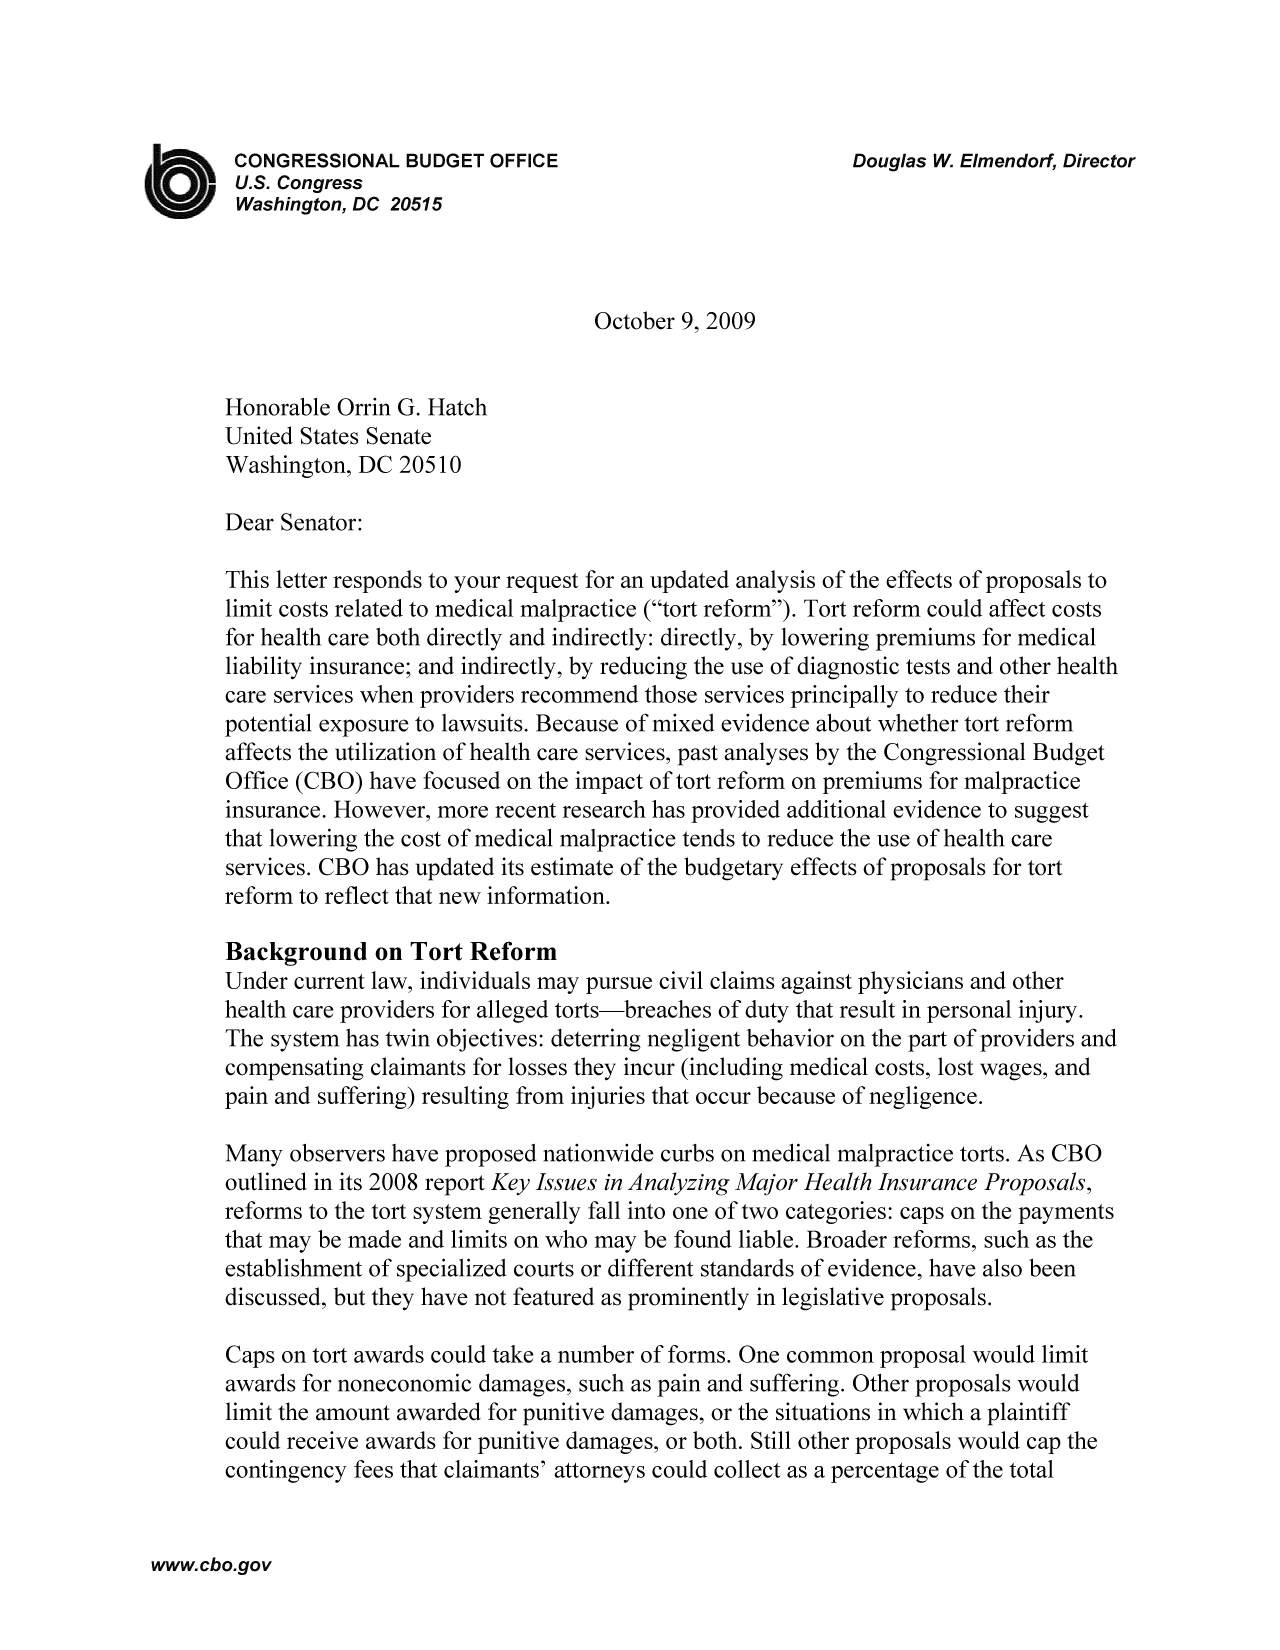 handle is hein.congrec/cbo9359 and id is 1 raw text is: CONGRESSIONAL BUDGET OFFICE                         Douglas W. Elmendorf, Director
U.S. Congress
Washington, DC 20515
October 9, 2009
Honorable Orrin G. Hatch
United States Senate
Washington, DC 20510
Dear Senator:
This letter responds to your request for an updated analysis of the effects of proposals to
limit costs related to medical malpractice (tort reform). Tort reform could affect costs
for health care both directly and indirectly: directly, by lowering premiums for medical
liability insurance; and indirectly, by reducing the use of diagnostic tests and other health
care services when providers recommend those services principally to reduce their
potential exposure to lawsuits. Because of mixed evidence about whether tort reform
affects the utilization of health care services, past analyses by the Congressional Budget
Office (CBO) have focused on the impact of tort reform on premiums for malpractice
insurance. However, more recent research has provided additional evidence to suggest
that lowering the cost of medical malpractice tends to reduce the use of health care
services. CBO has updated its estimate of the budgetary effects of proposals for tort
reform to reflect that new information.
Background on Tort Reform
Under current law, individuals may pursue civil claims against physicians and other
health care providers for alleged torts-breaches of duty that result in personal injury.
The system has twin objectives: deterring negligent behavior on the part of providers and
compensating claimants for losses they incur (including medical costs, lost wages, and
pain and suffering) resulting from injuries that occur because of negligence.
Many observers have proposed nationwide curbs on medical malpractice torts. As CBO
outlined in its 2008 report Key Issues in Analyzing Major Health Insurance Proposals,
reforms to the tort system generally fall into one of two categories: caps on the payments
that may be made and limits on who may be found liable. Broader reforms, such as the
establishment of specialized courts or different standards of evidence, have also been
discussed, but they have not featured as prominently in legislative proposals.
Caps on tort awards could take a number of forms. One common proposal would limit
awards for noneconomic damages, such as pain and suffering. Other proposals would
limit the amount awarded for punitive damages, or the situations in which a plaintiff
could receive awards for punitive damages, or both. Still other proposals would cap the
contingency fees that claimants' attorneys could collect as a percentage of the total

www.cbo.gov


